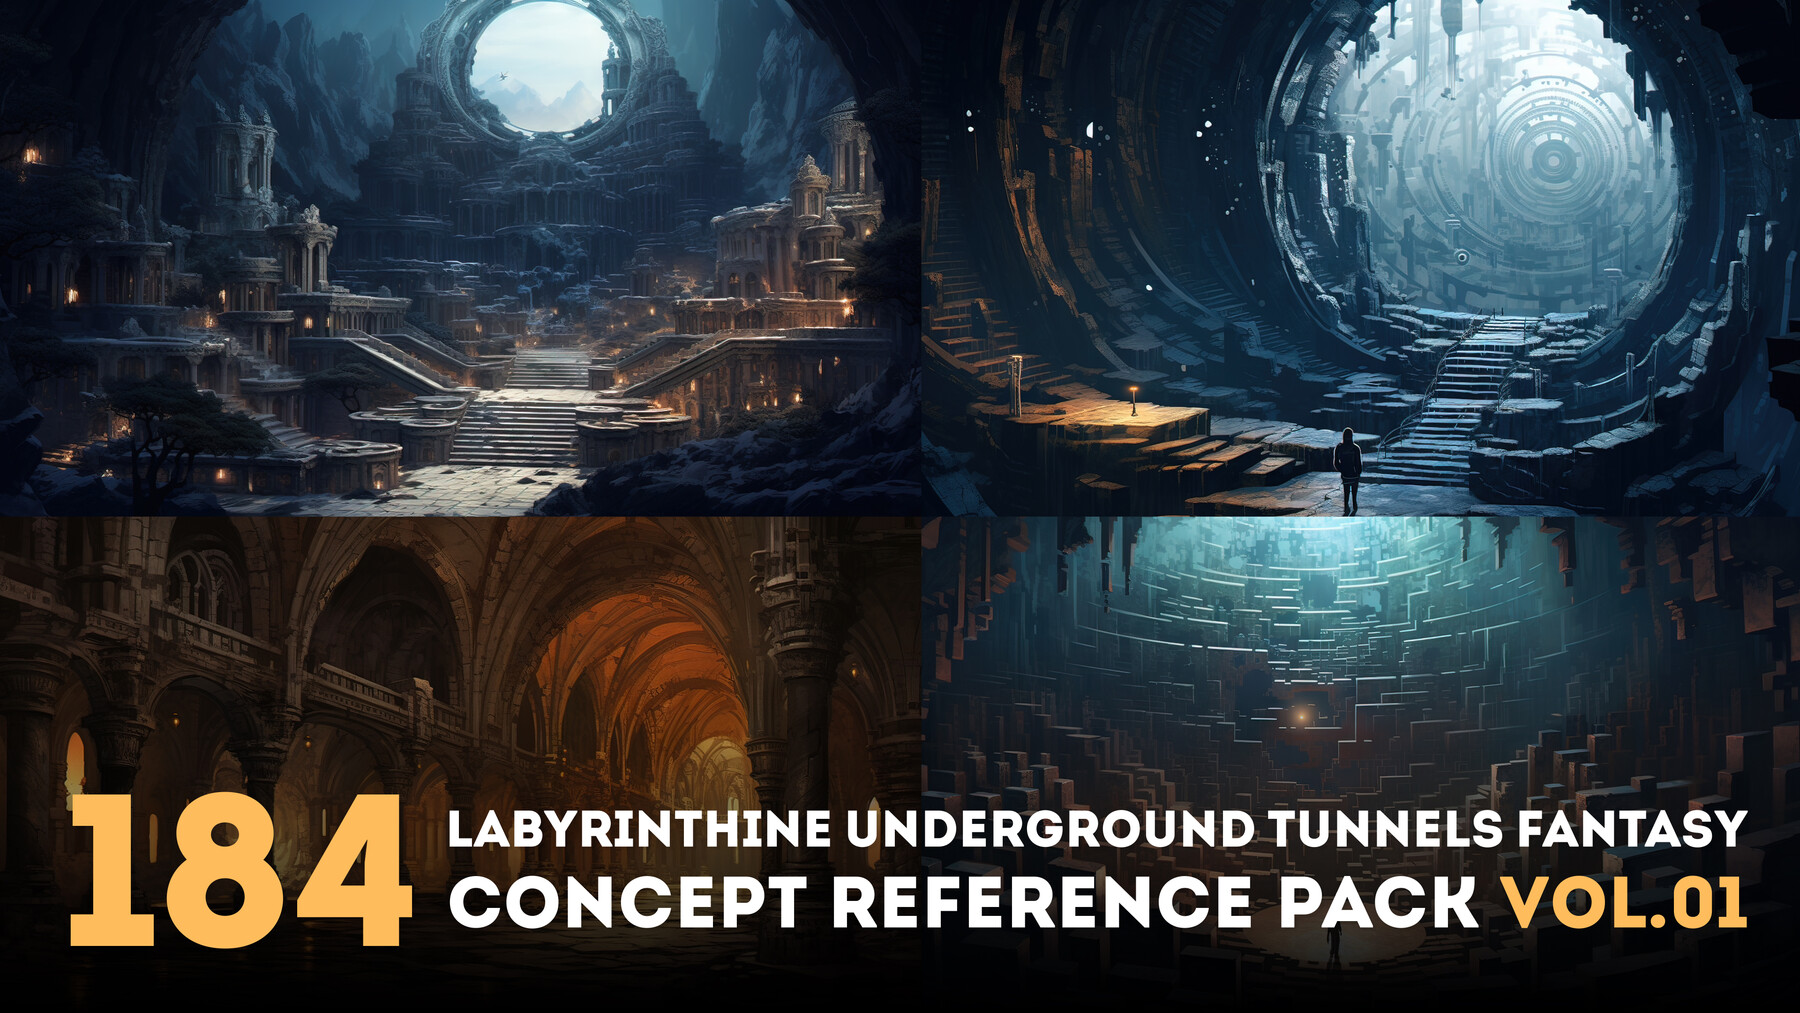 Old Underground Tunnel | 3d Models for Daz Studio and Poser